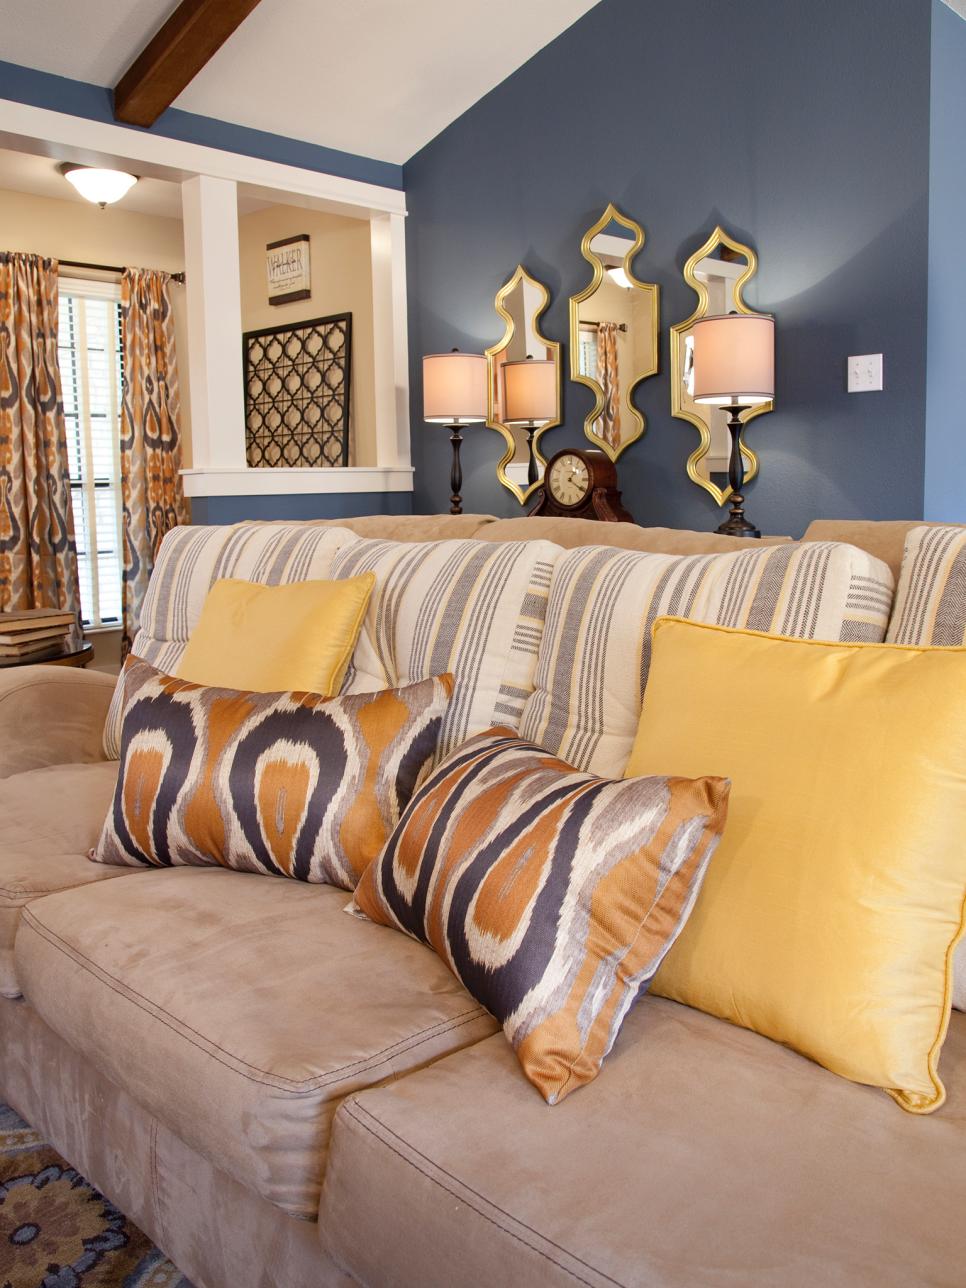 Blue Living Room With Beige Sofa and Gold & Gray Ikat Pillows